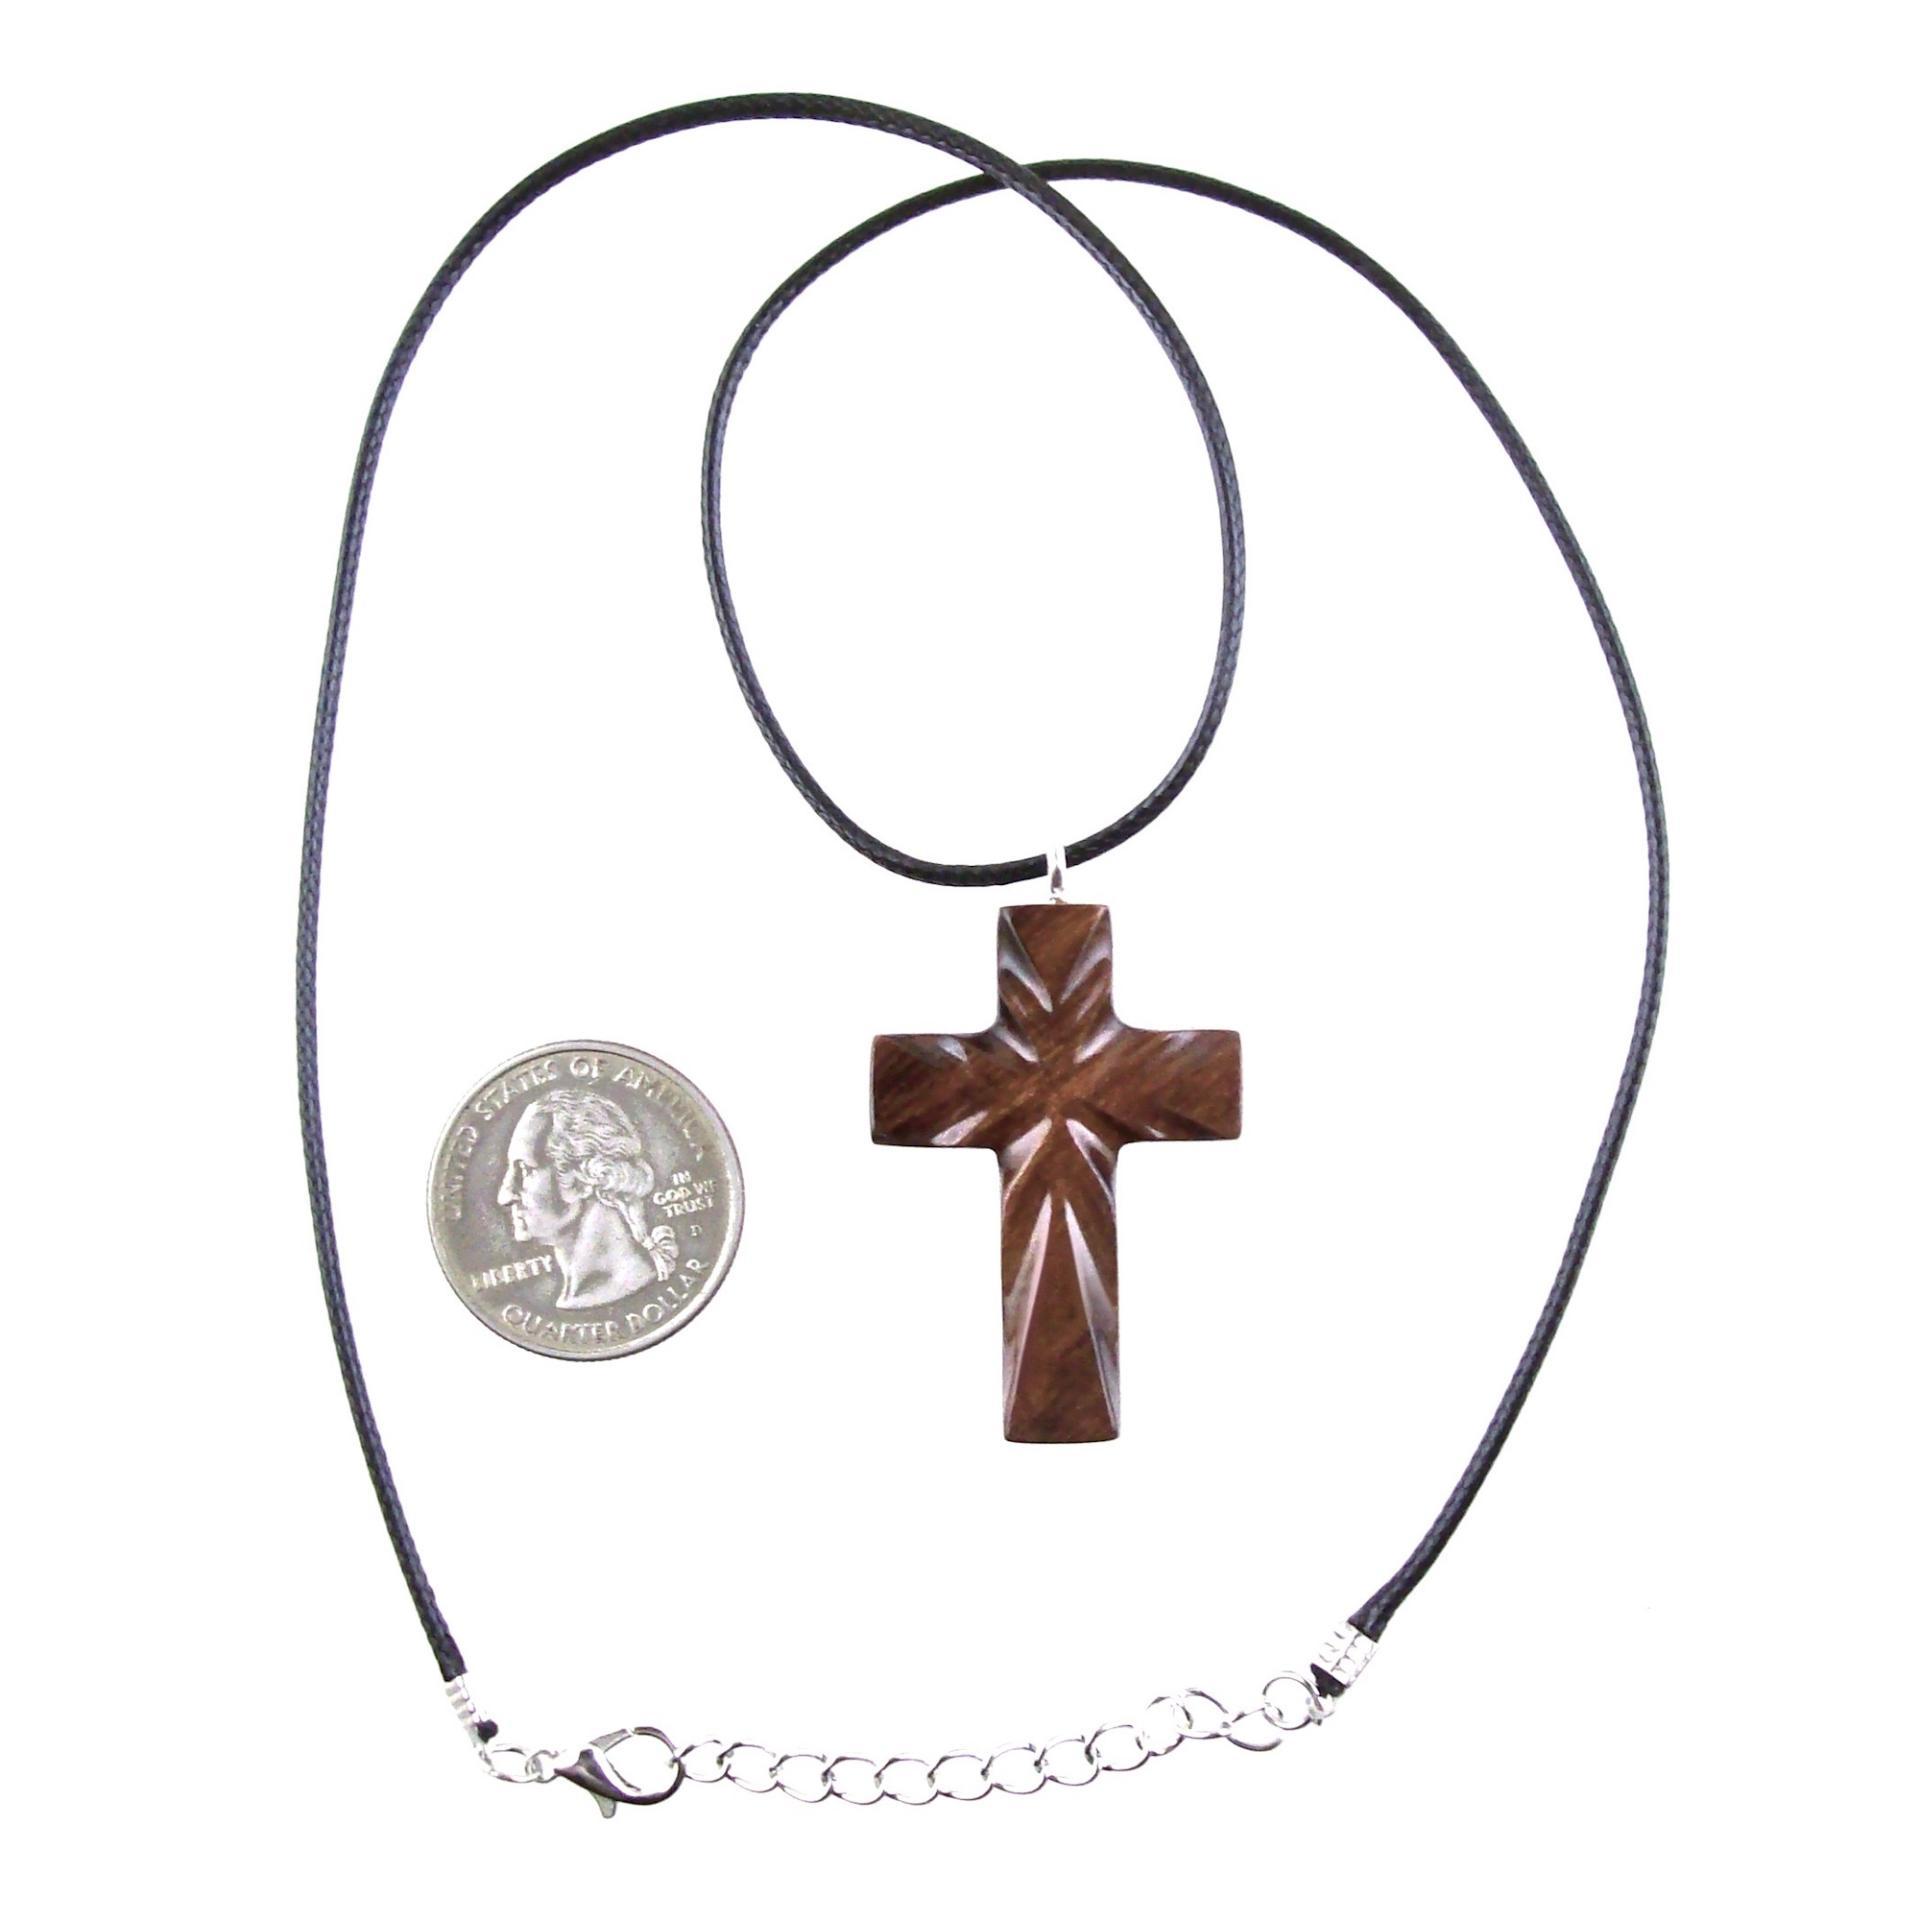 Wood Cross Necklace, Wooden Cross Pendant, Hand Carved Christian Jewelry, One of a Kind Gift for Him Her